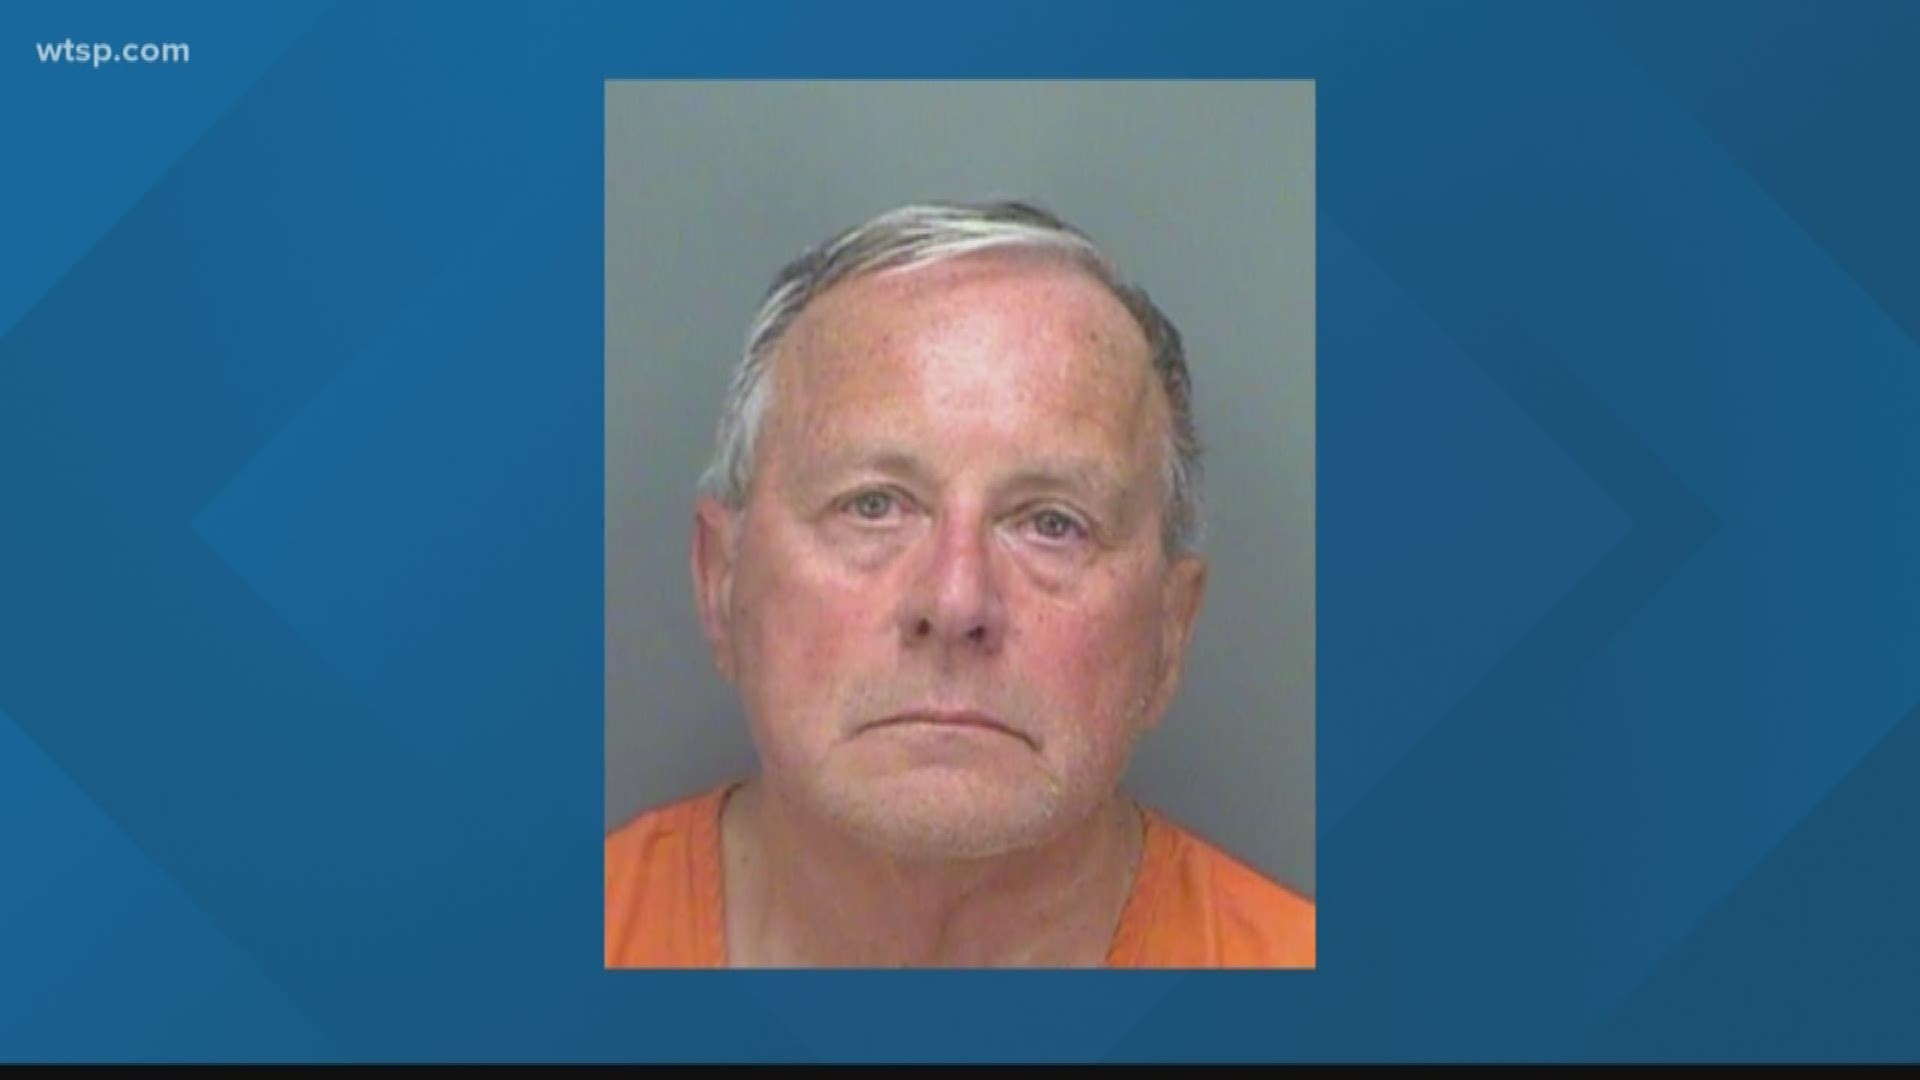 A Clearwater man was charged Thursday with possessing child porn and of molesting a boy he was foster parenting, Pinellas Park police said.

Robert E. Metzner, 69, was arrested Thursday.

Police said someone gave them a USB drive that belonged to Metzner. After obtaining a warrant, investigators found the drive contained 160 images of child porn.